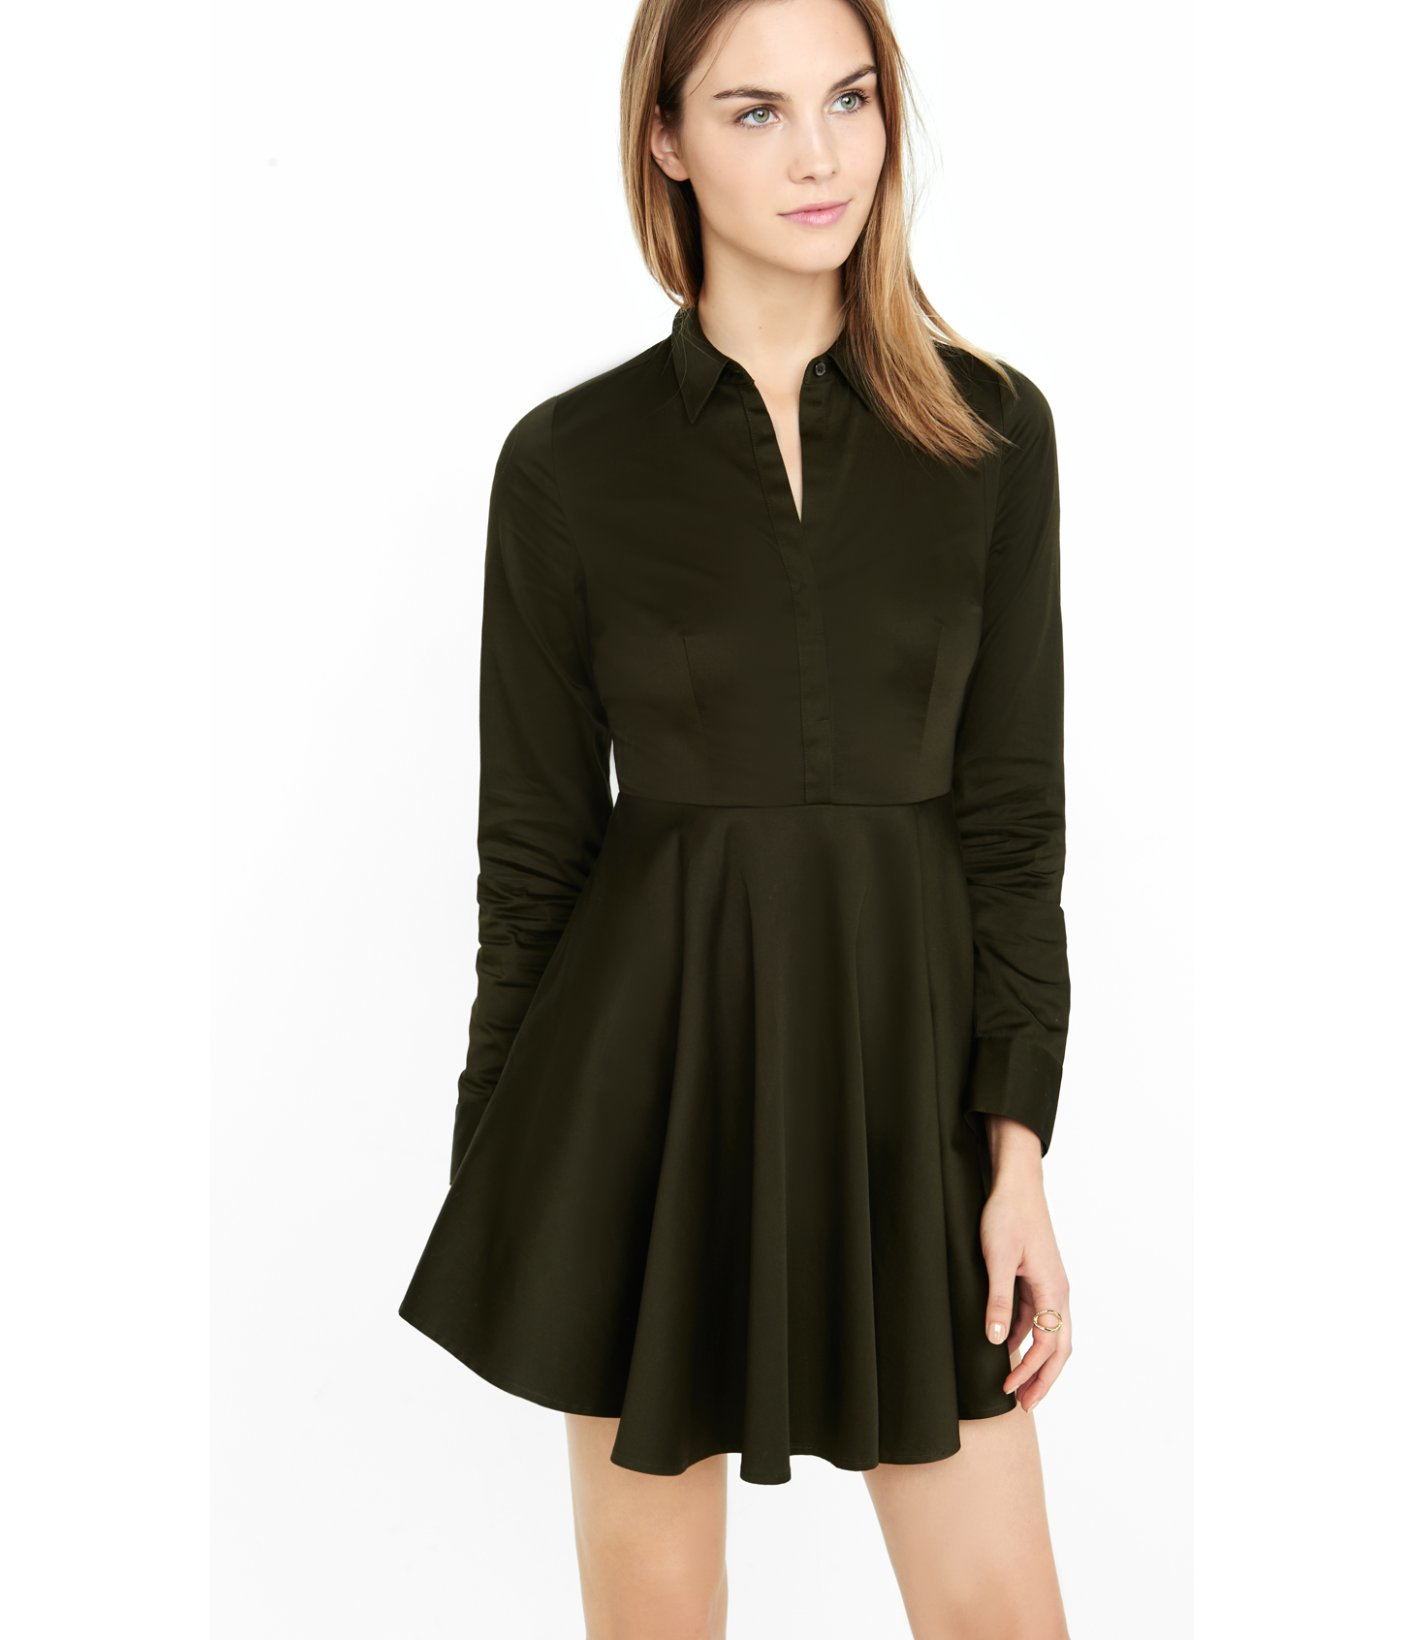 Express Olive Green Fit And Flare Shirt Dress in Green | Lyst